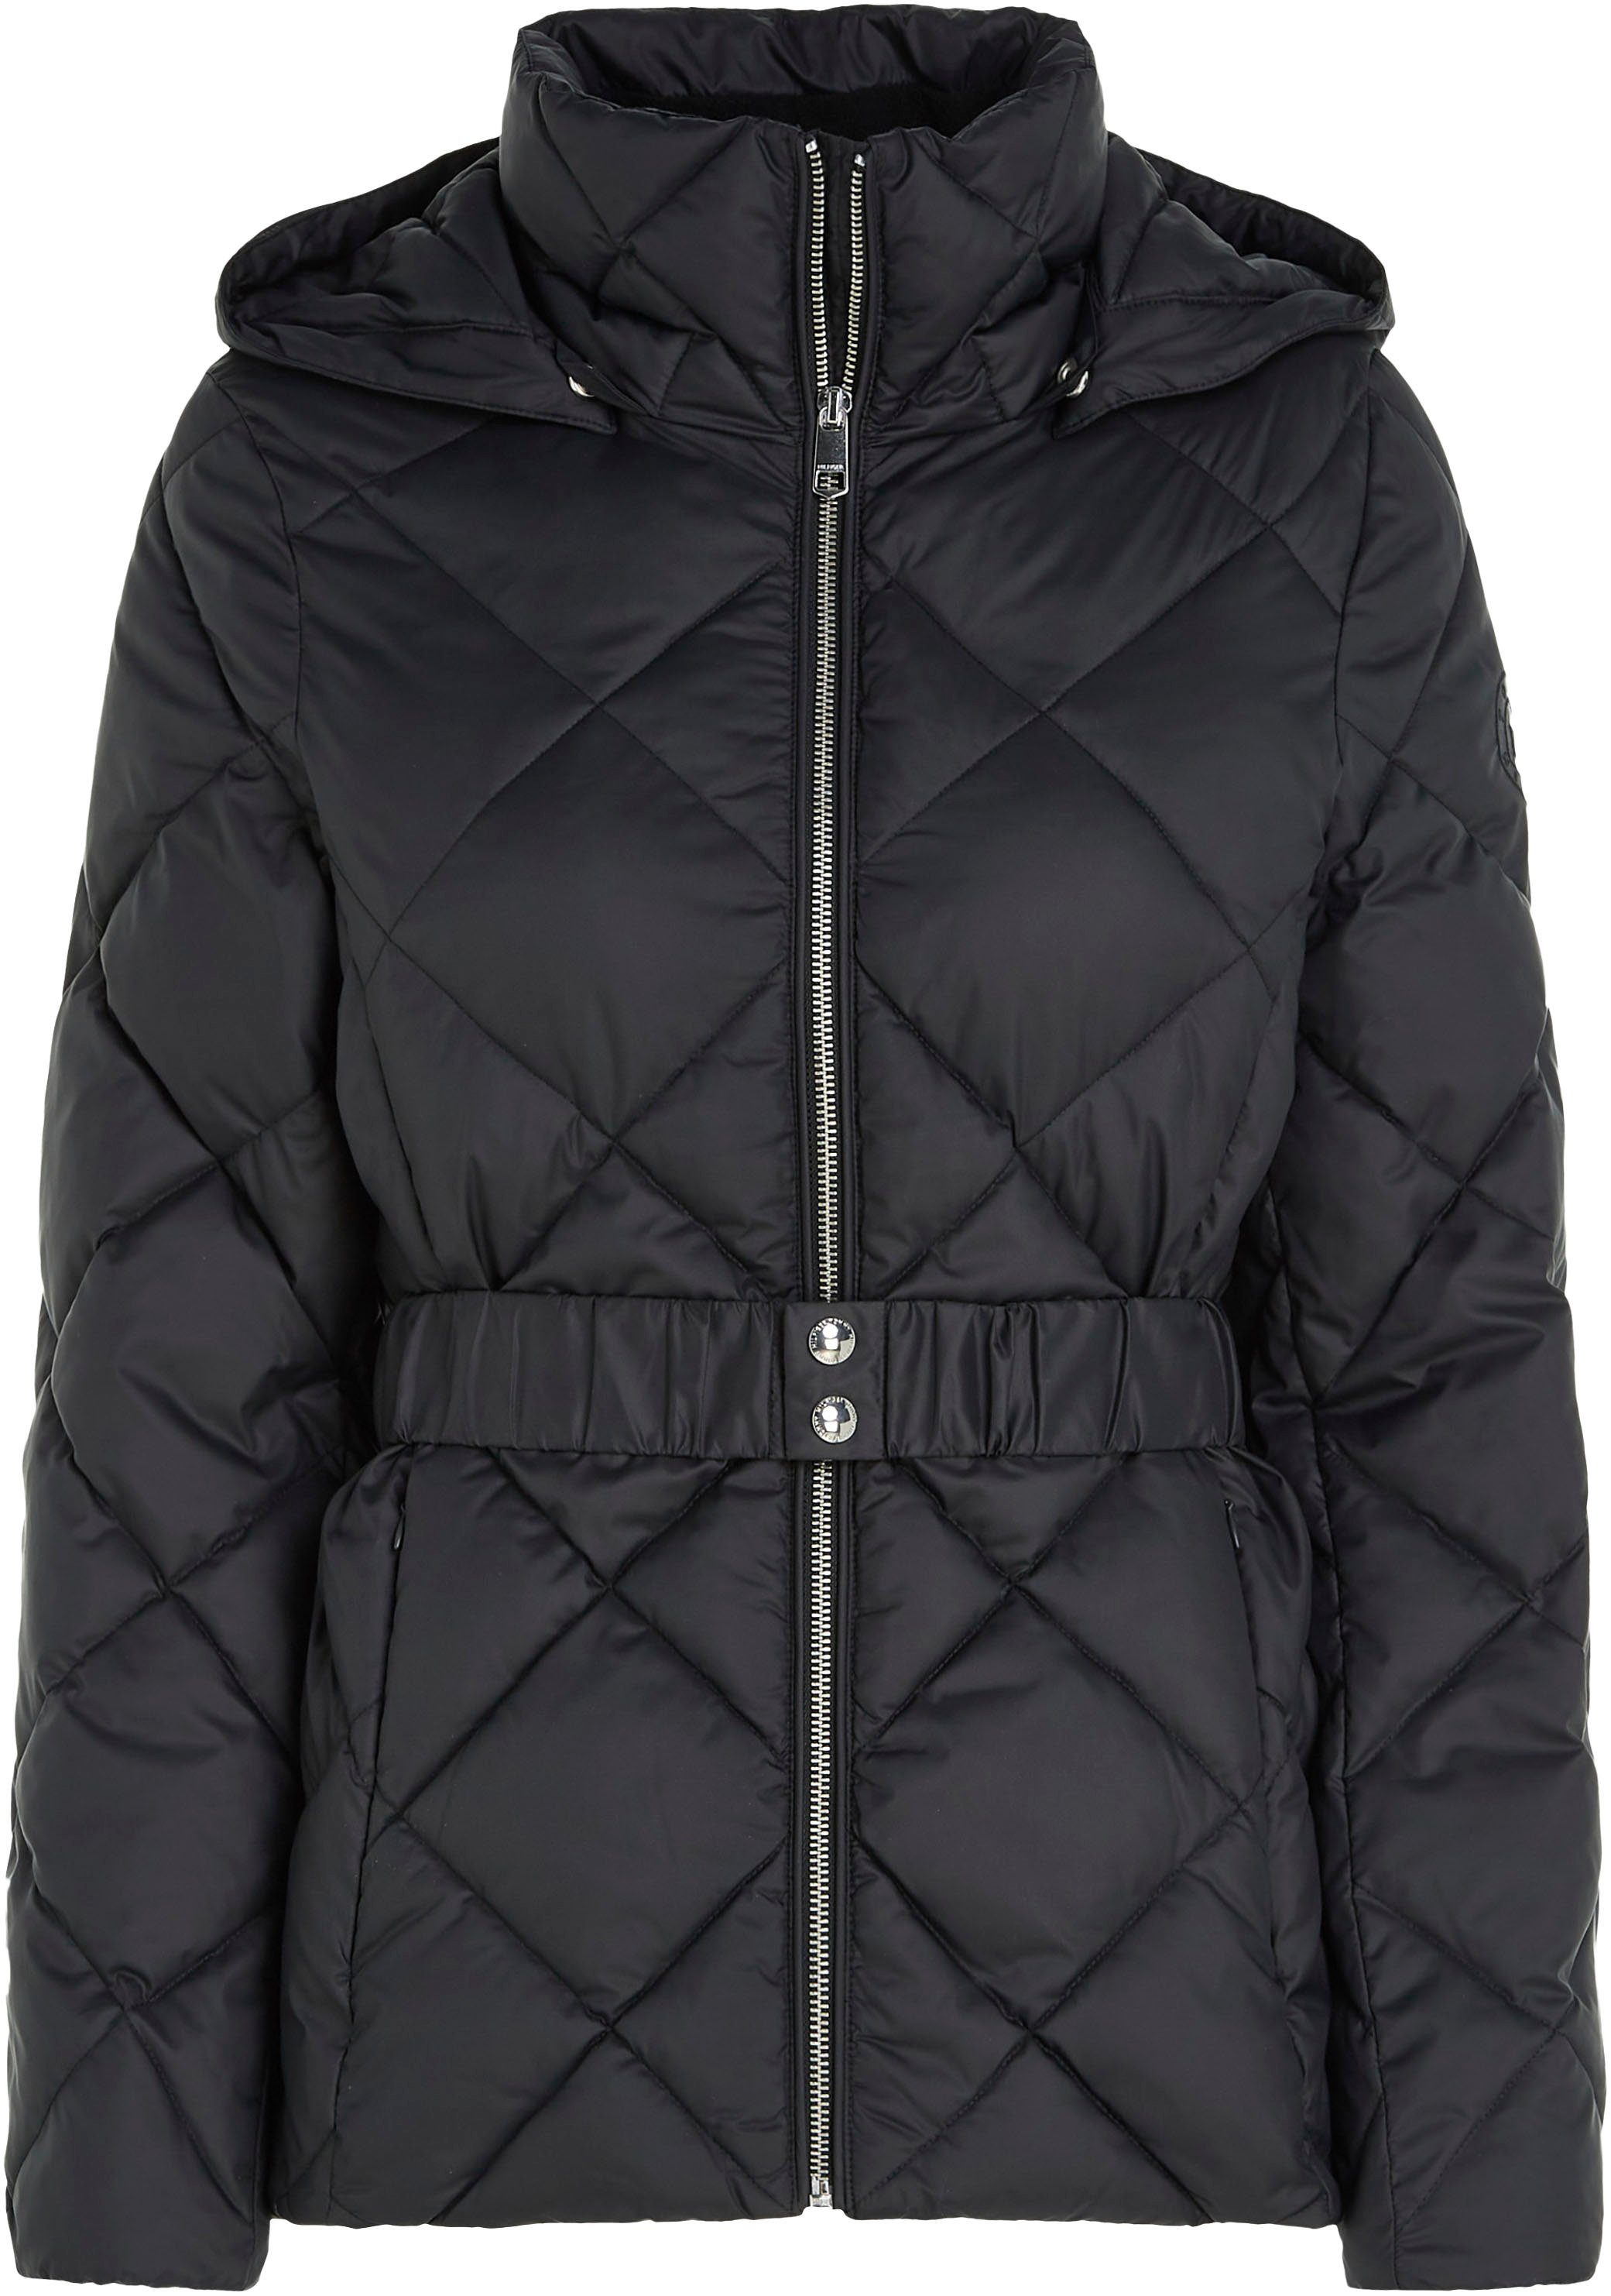 QUILTED ELEVATED Steppjacke BELTED Logostickerei mit JACKET Hilfiger Tommy